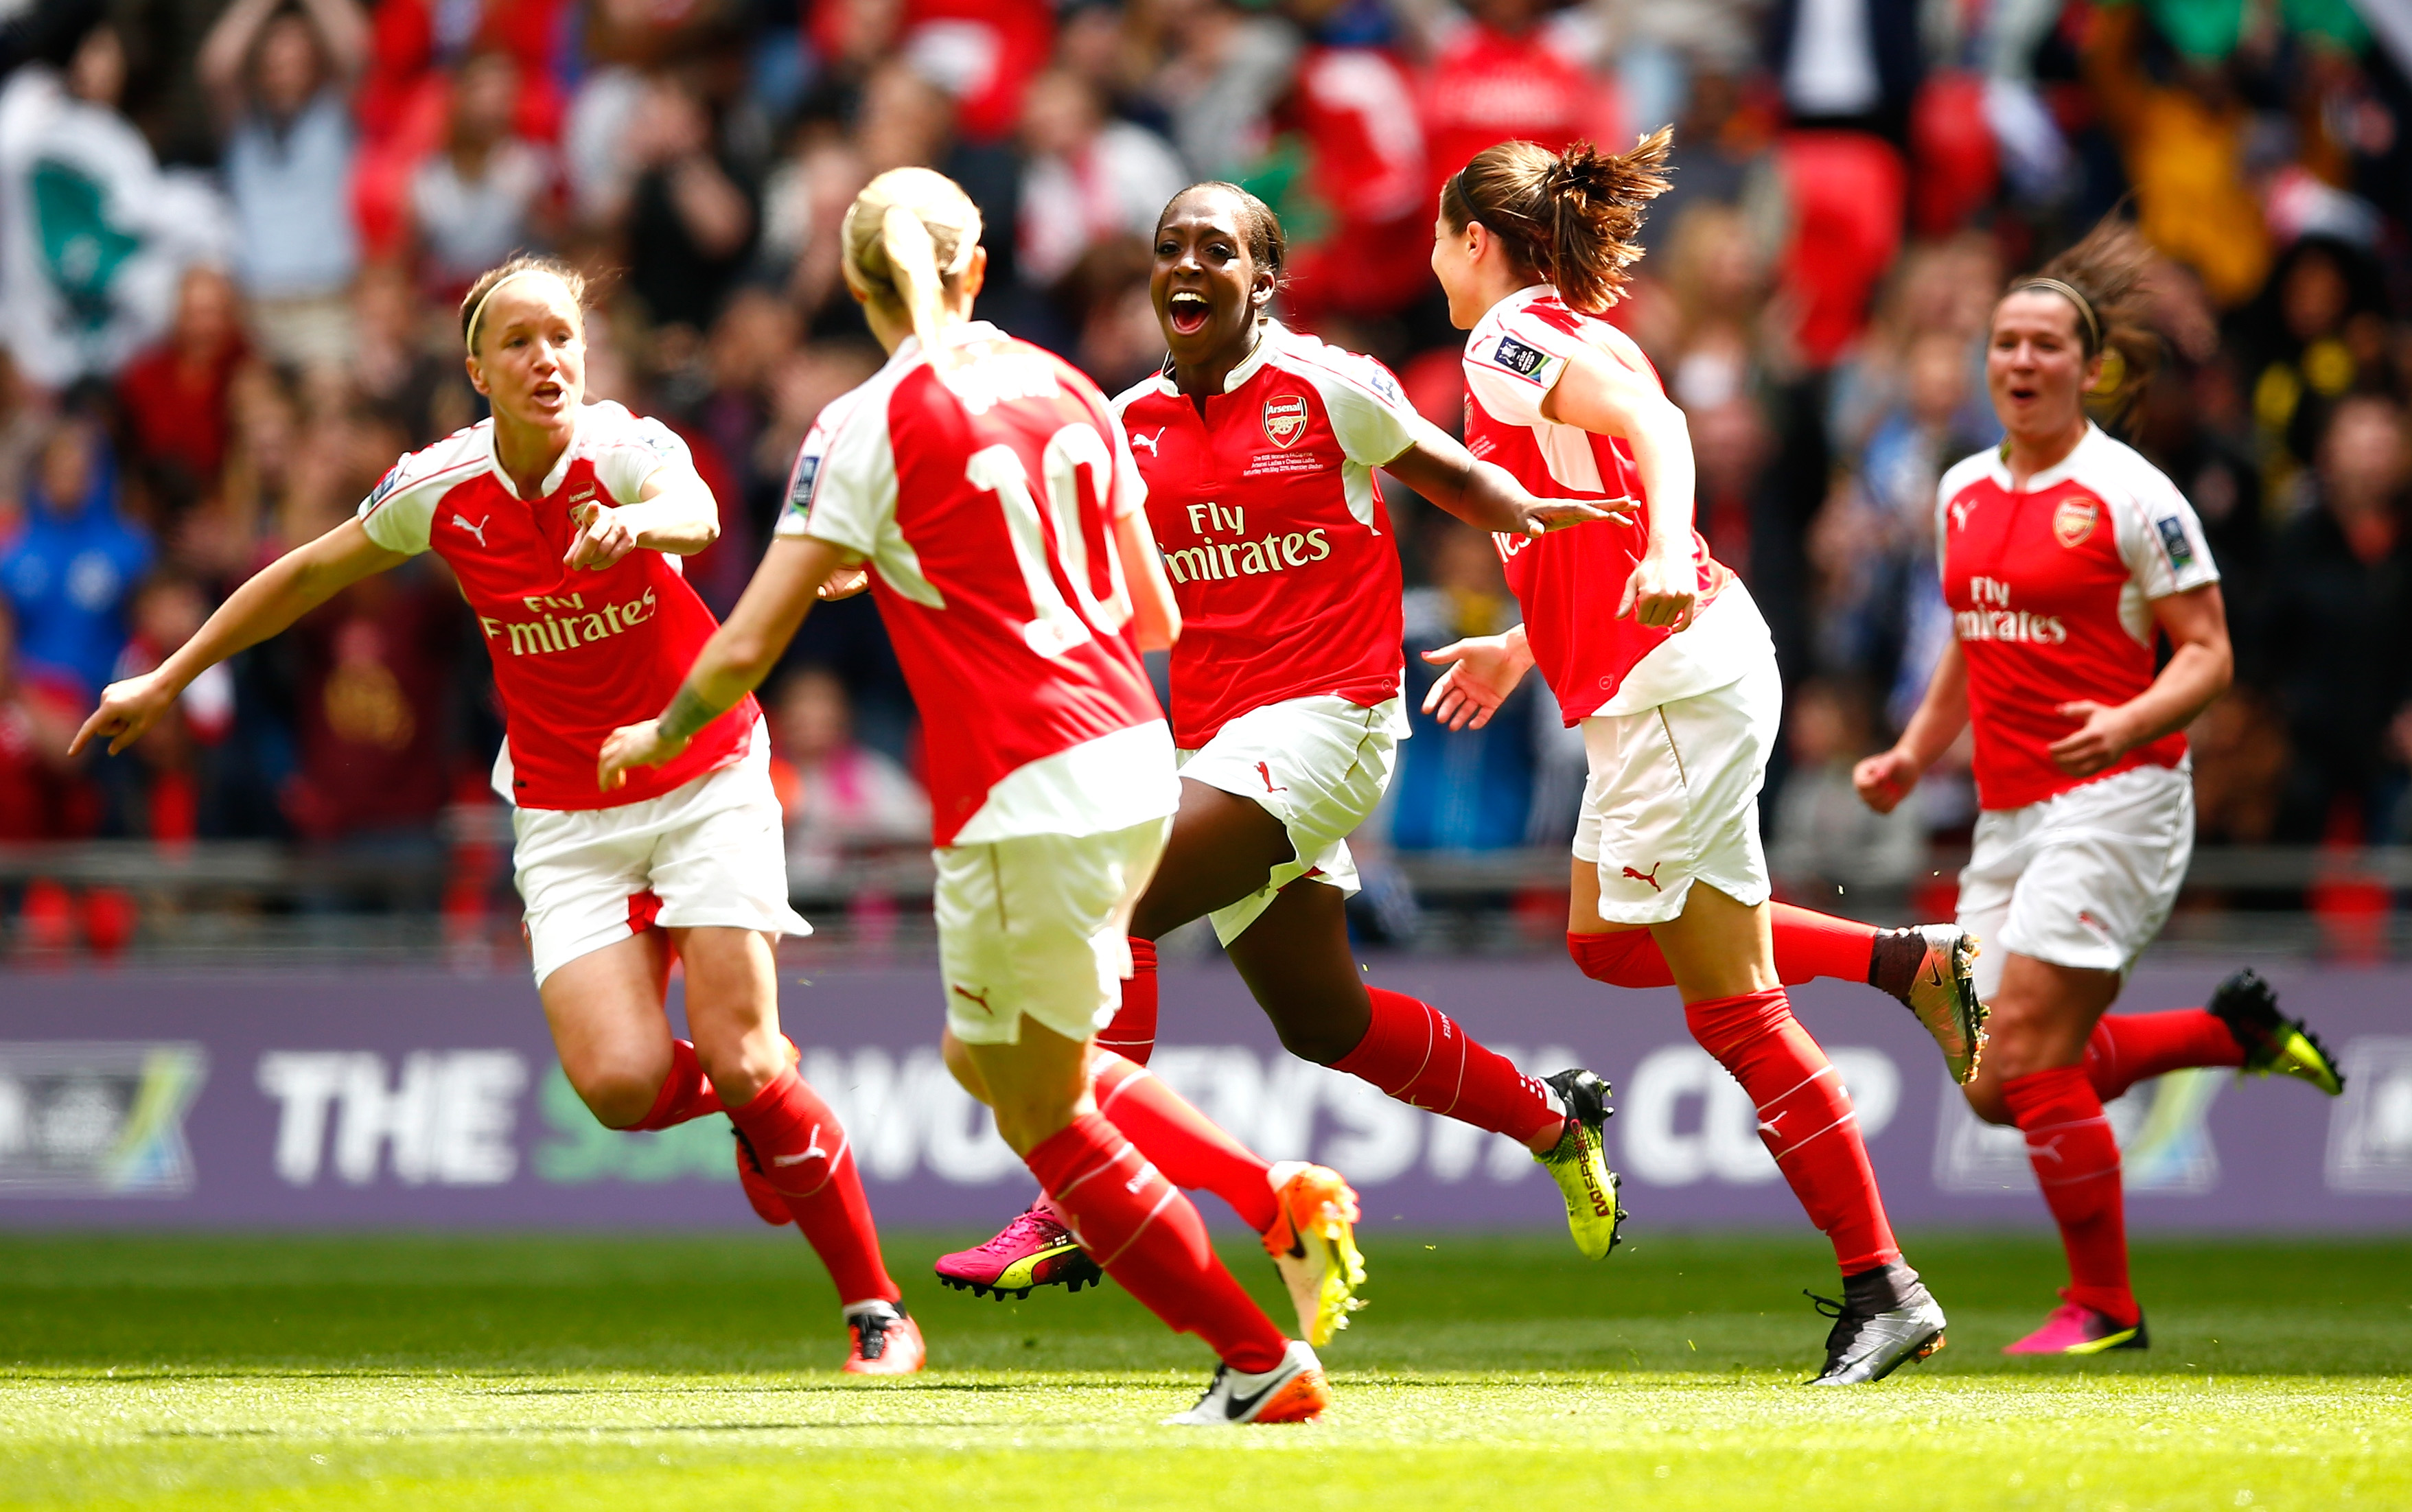 "LONDON, ENGLAND - MAY 14: Danielle Carter (C) of Arsenal celebrates scoring his team's first goal with her team mates during the SSE Women's FA Cup Final between Arsenal Ladies and Chelsea Ladies at Wembley Stadium on May 14, 2016 in London, England. (Photo by Christopher Lee - The FA/The FA via Getty Images)"